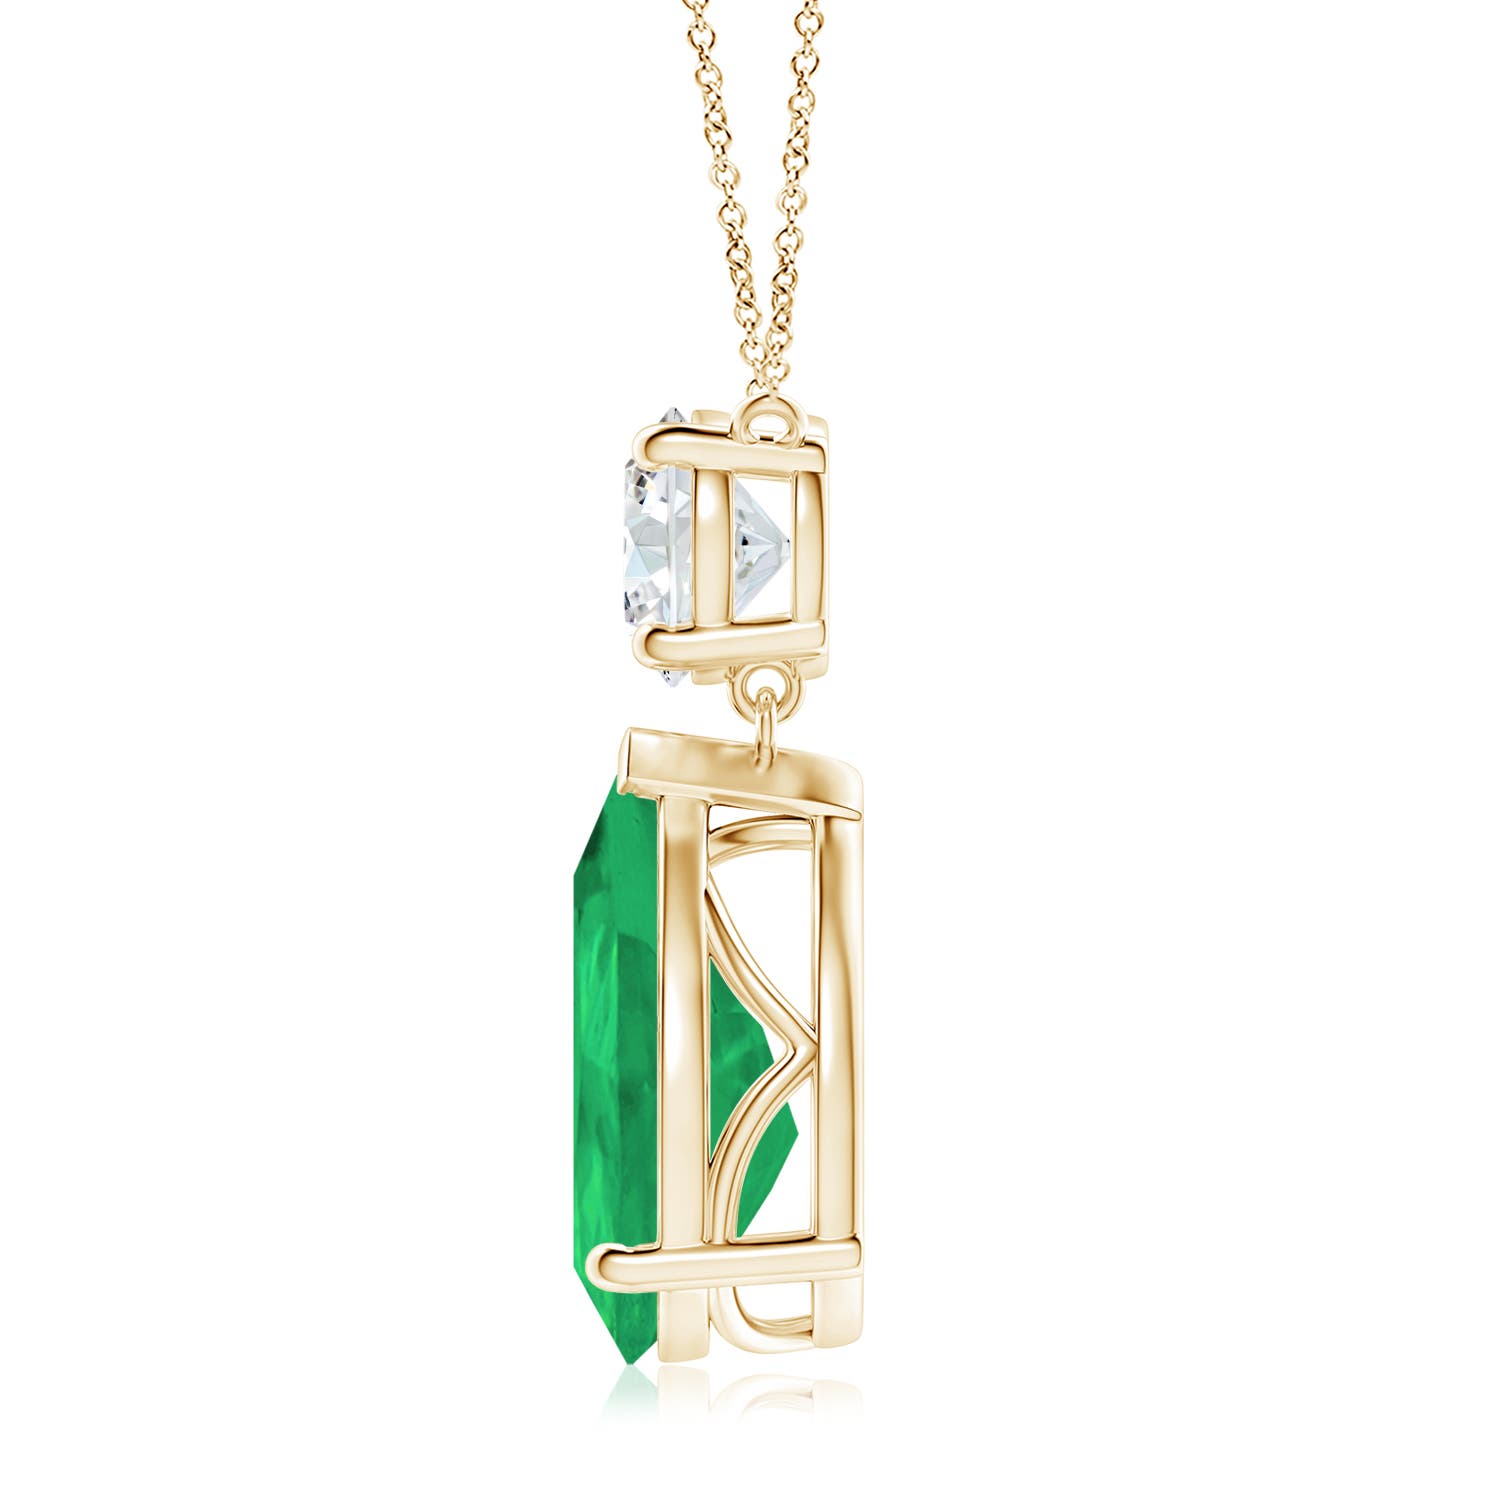 A - Emerald / 7.6 CT / 14 KT Yellow Gold